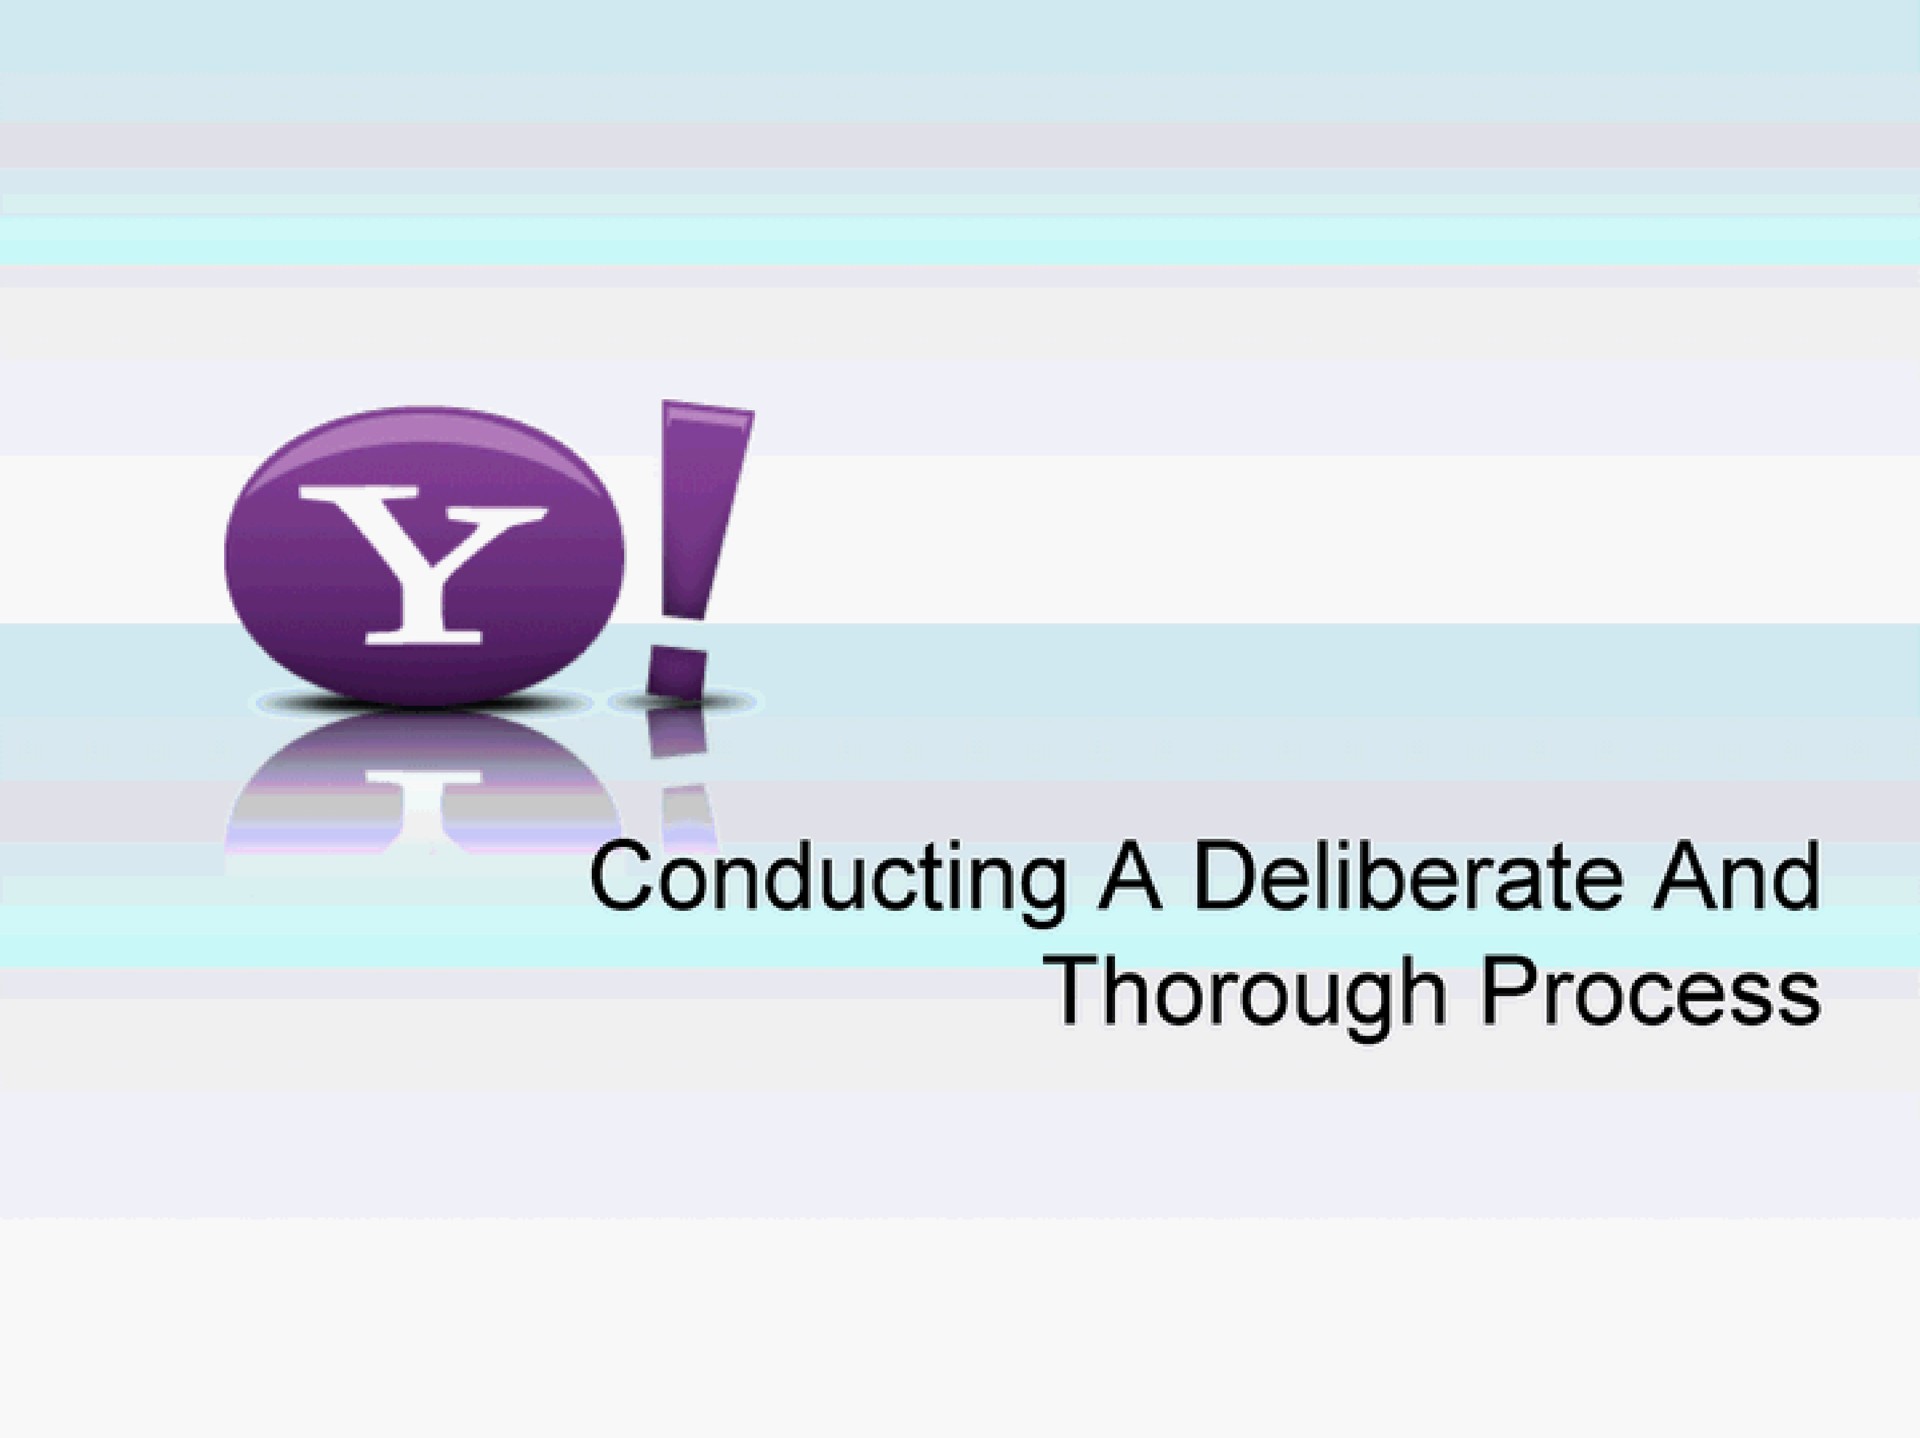 conducting a deliberate and thorough process | Yahoo